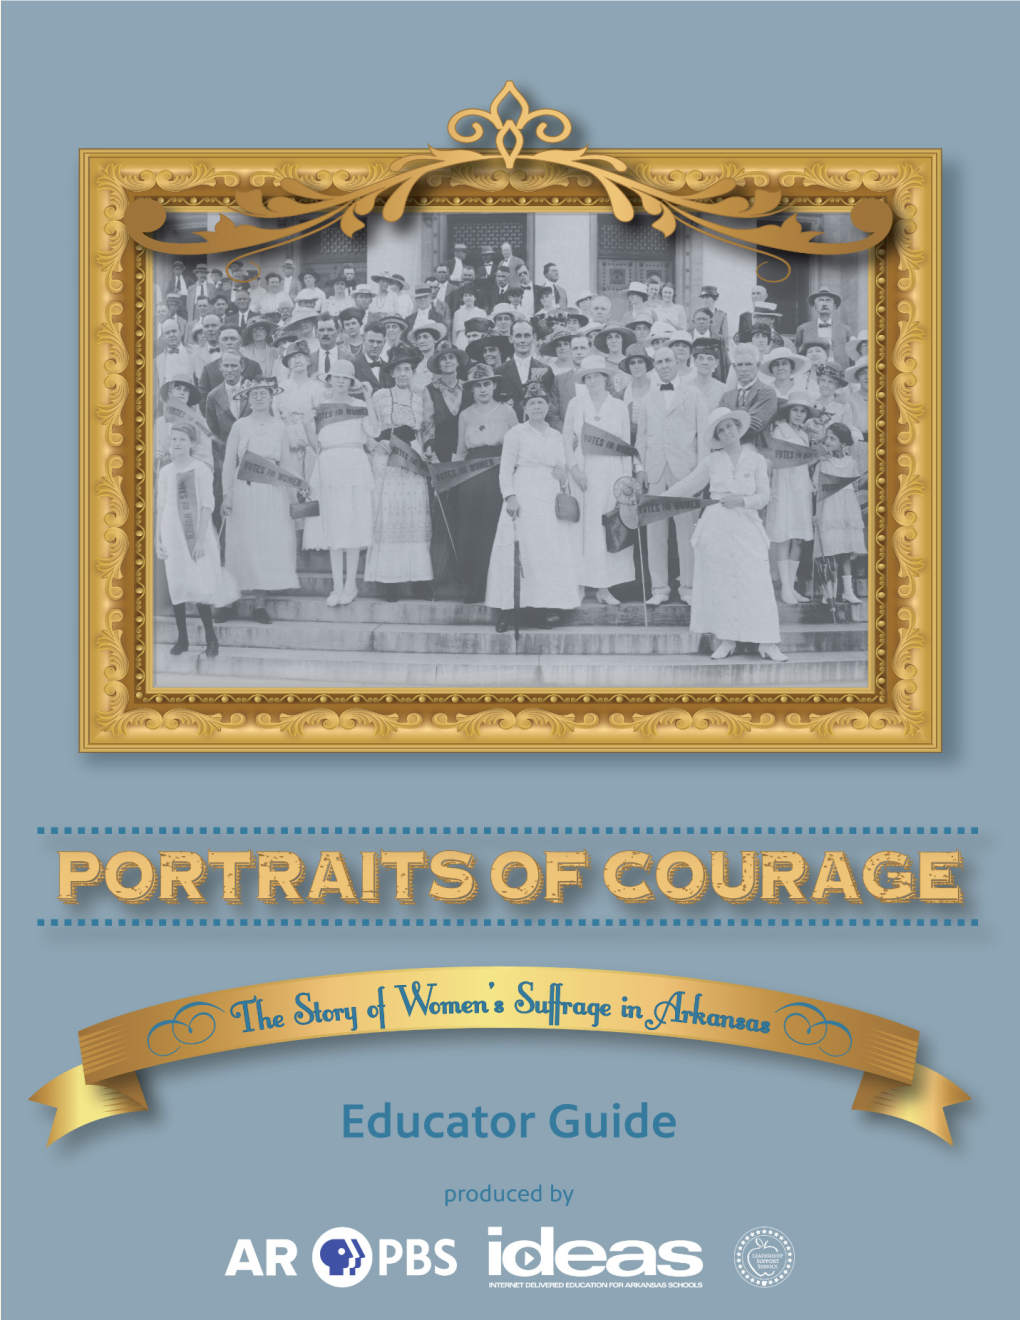 Educator Guide As a Resource for Middle and Secondary Teachers Who Wish to Use Portraits in the Classroom